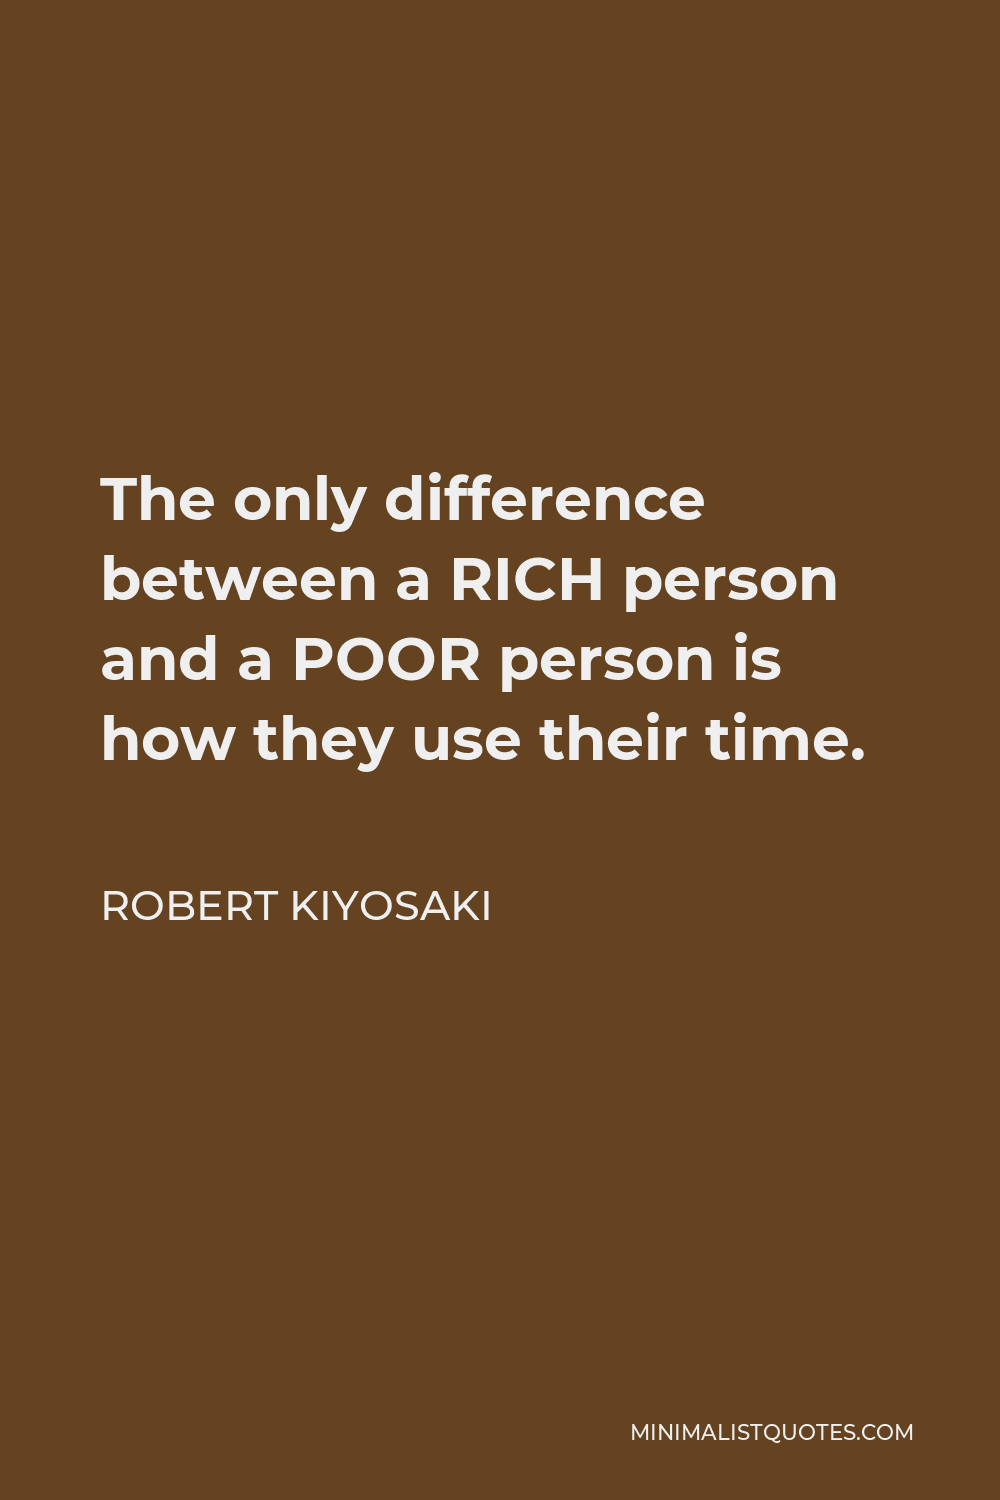 Robert Kiyosaki Quote - The only difference between a RICH person and a POOR person is how they use their time.